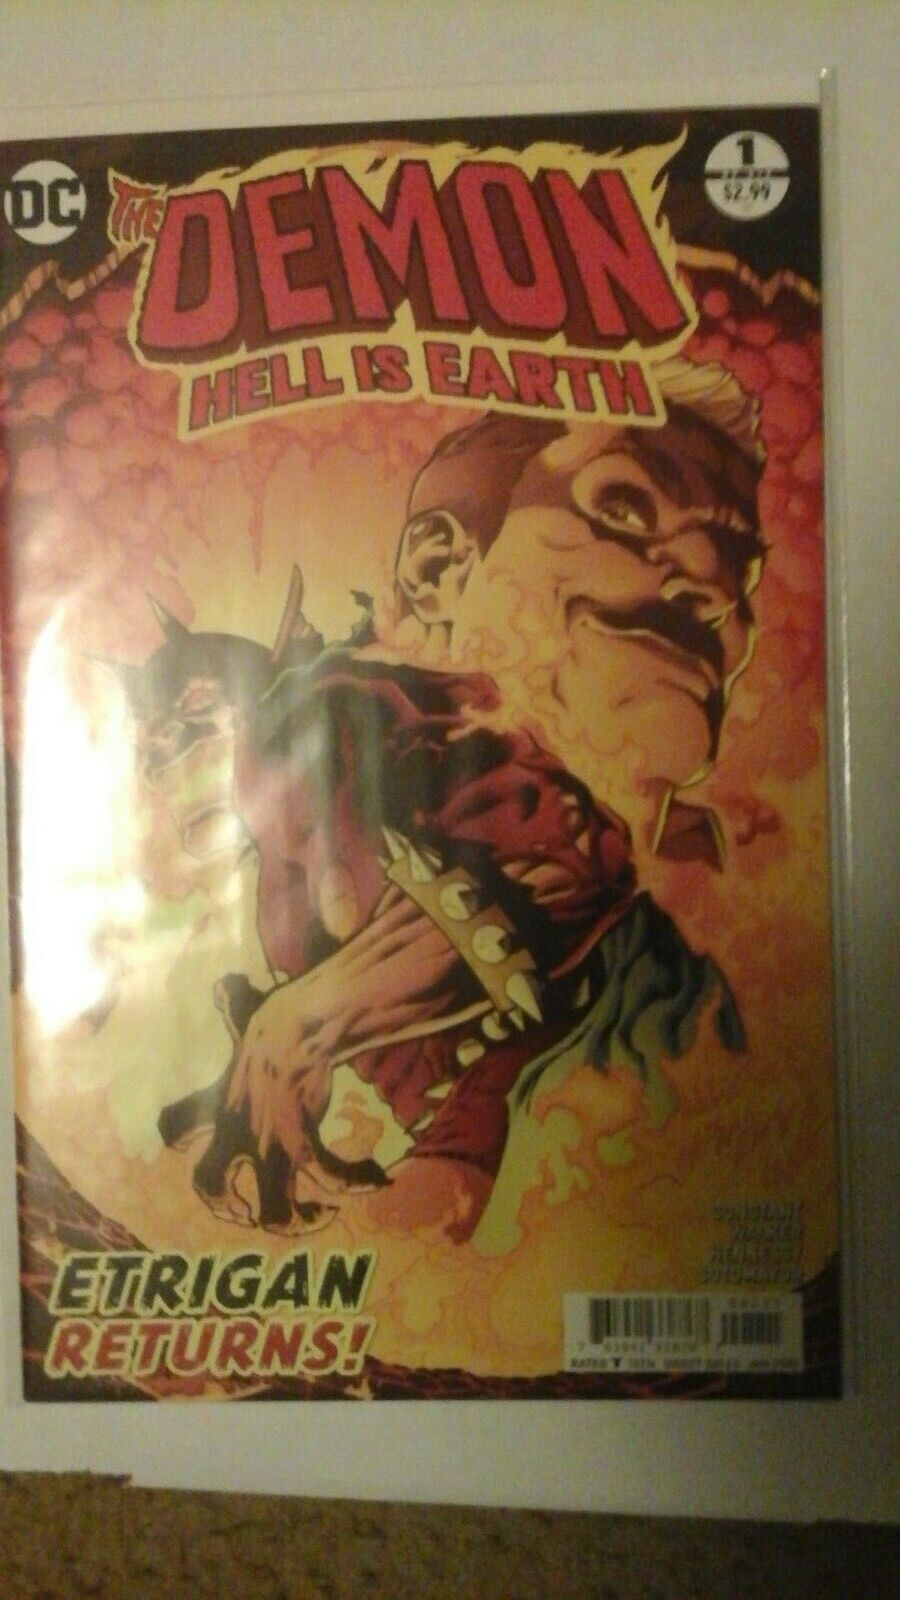 Demon Hell is Earth #1 2018 NM DC COMICS first printing